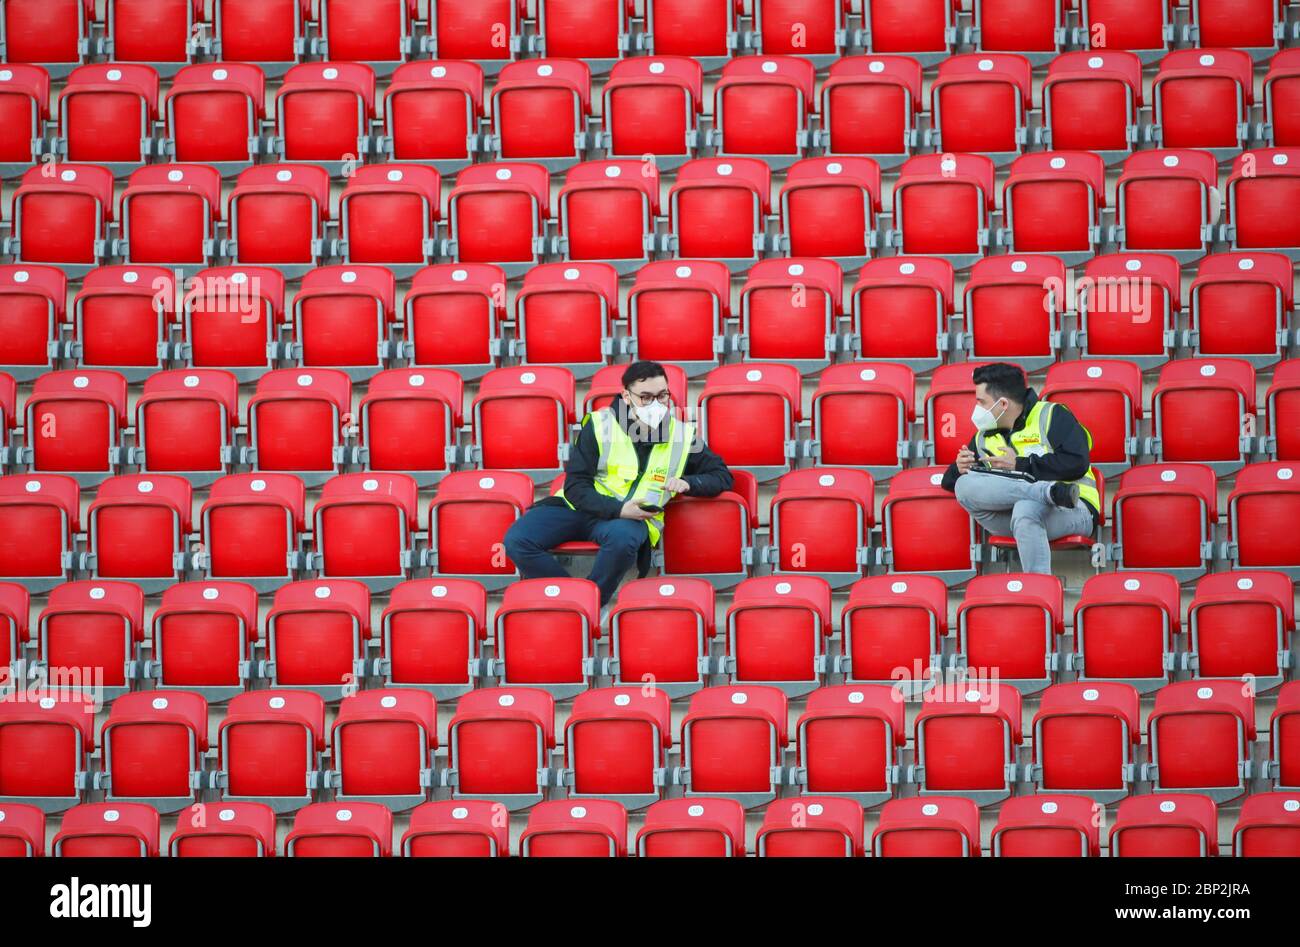 Steward in the stands during the German Bundesliga soccer match between Union Berlin and Bayern Munich in Berlin, Germany. Stock Photo